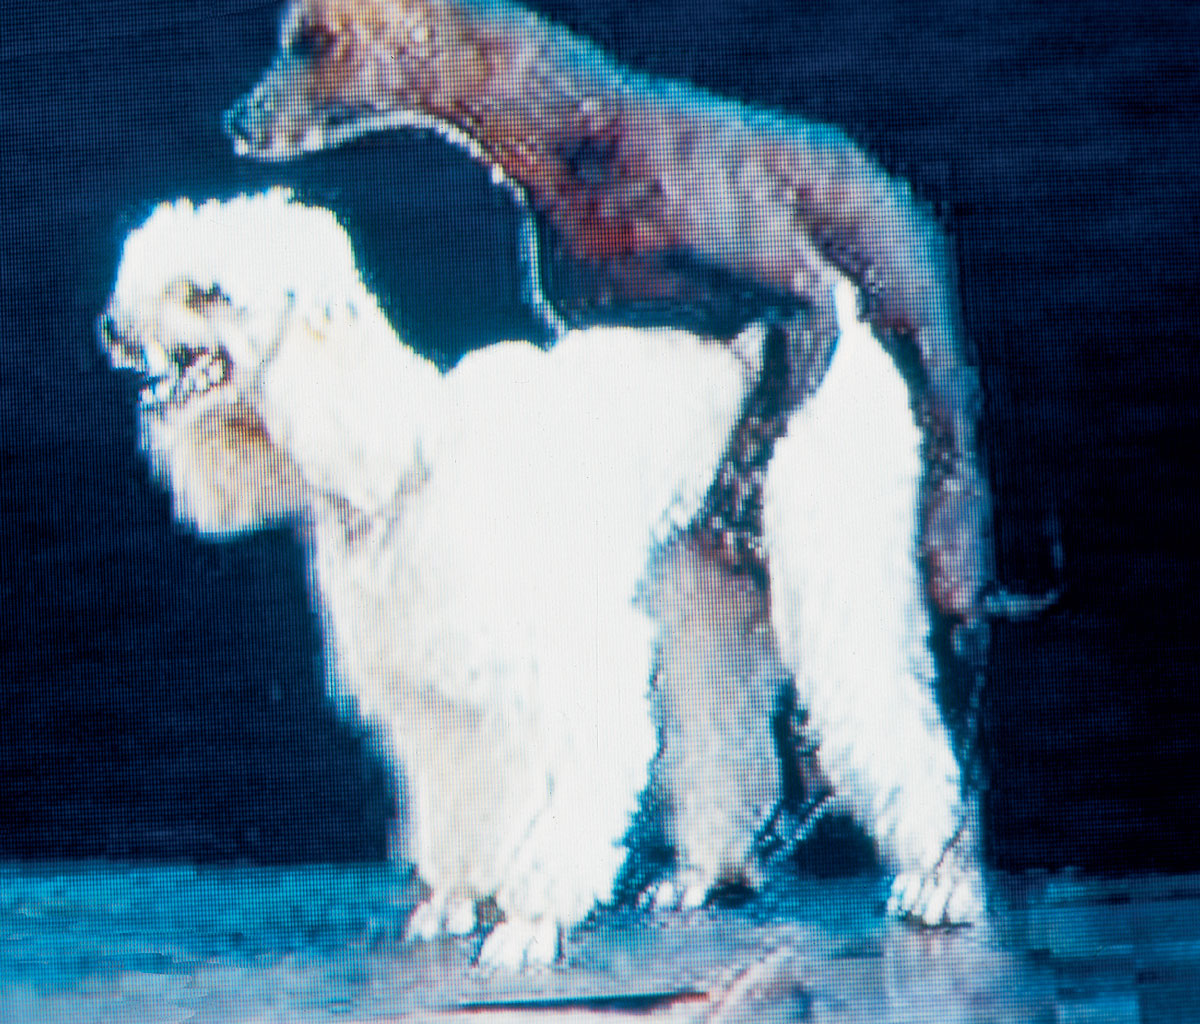 A video still from artist Yoshua Okon's 1998 work “Chocorol” depicting two dogs mating.